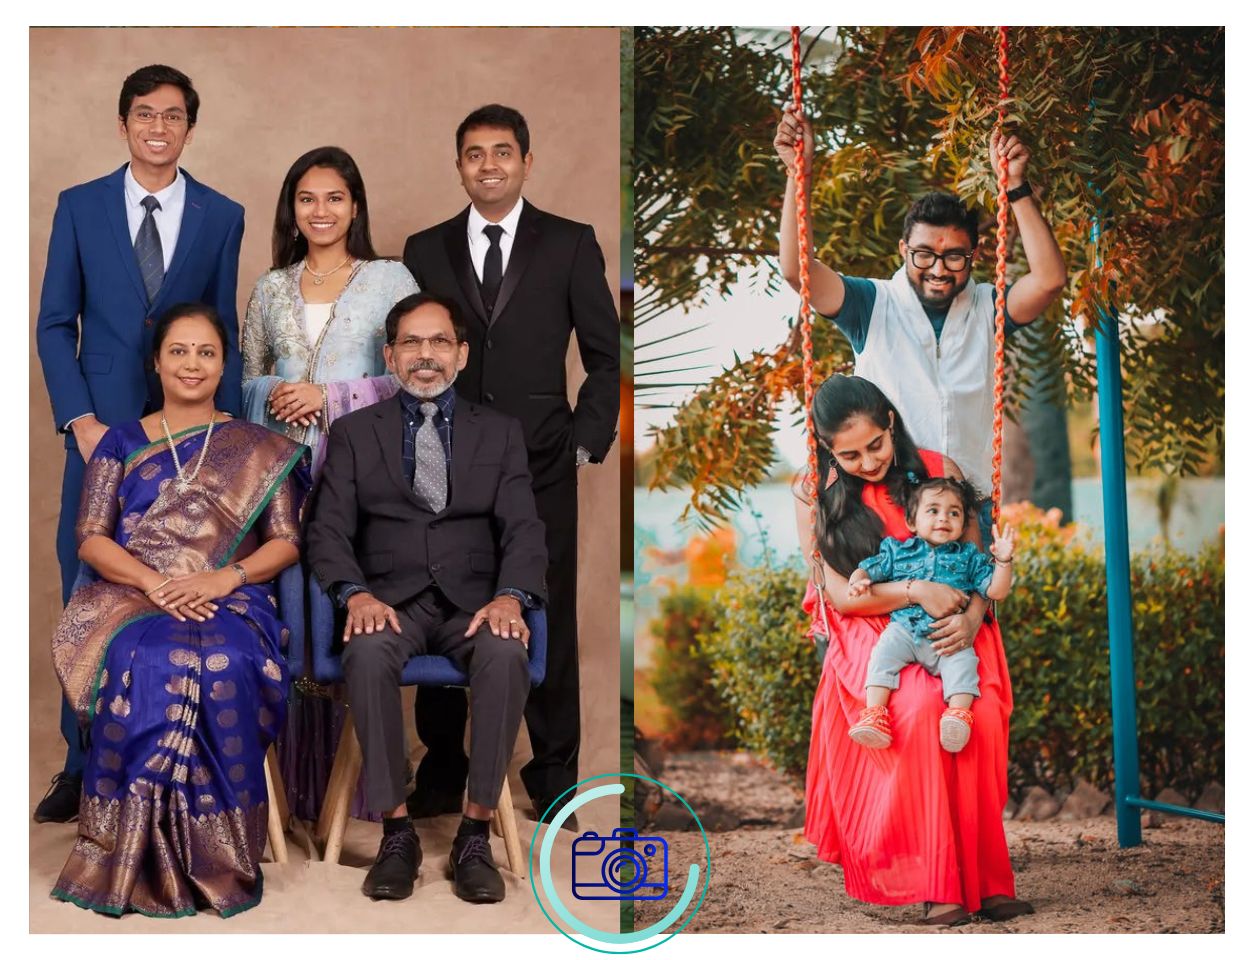 https://indiadarpan.com/wp-admin/post.php?post=2037&action=edit#:~:text=ATTACHMENT%20DETAILS-,Family%2DPhoto%2DPoses%2Dfor%2DPhotoshoot,-%2Dat%2DHome%2D1